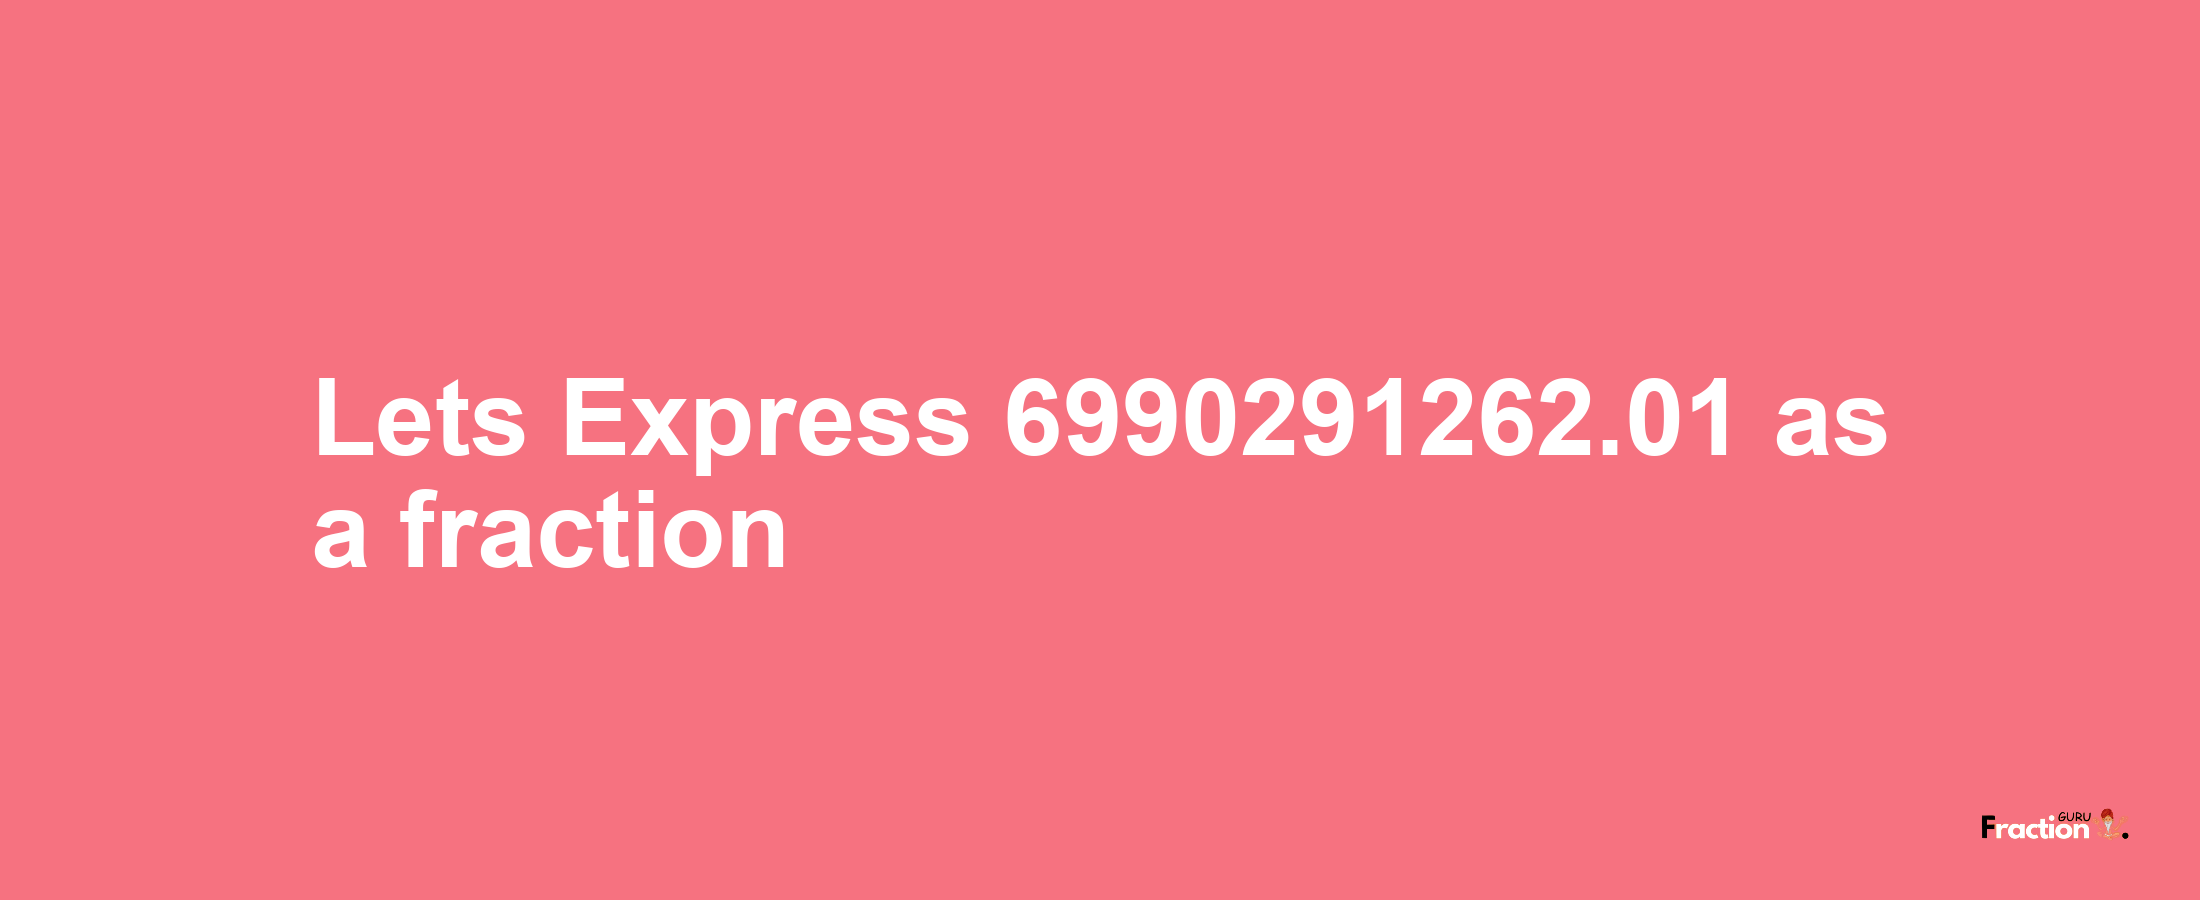 Lets Express 6990291262.01 as afraction